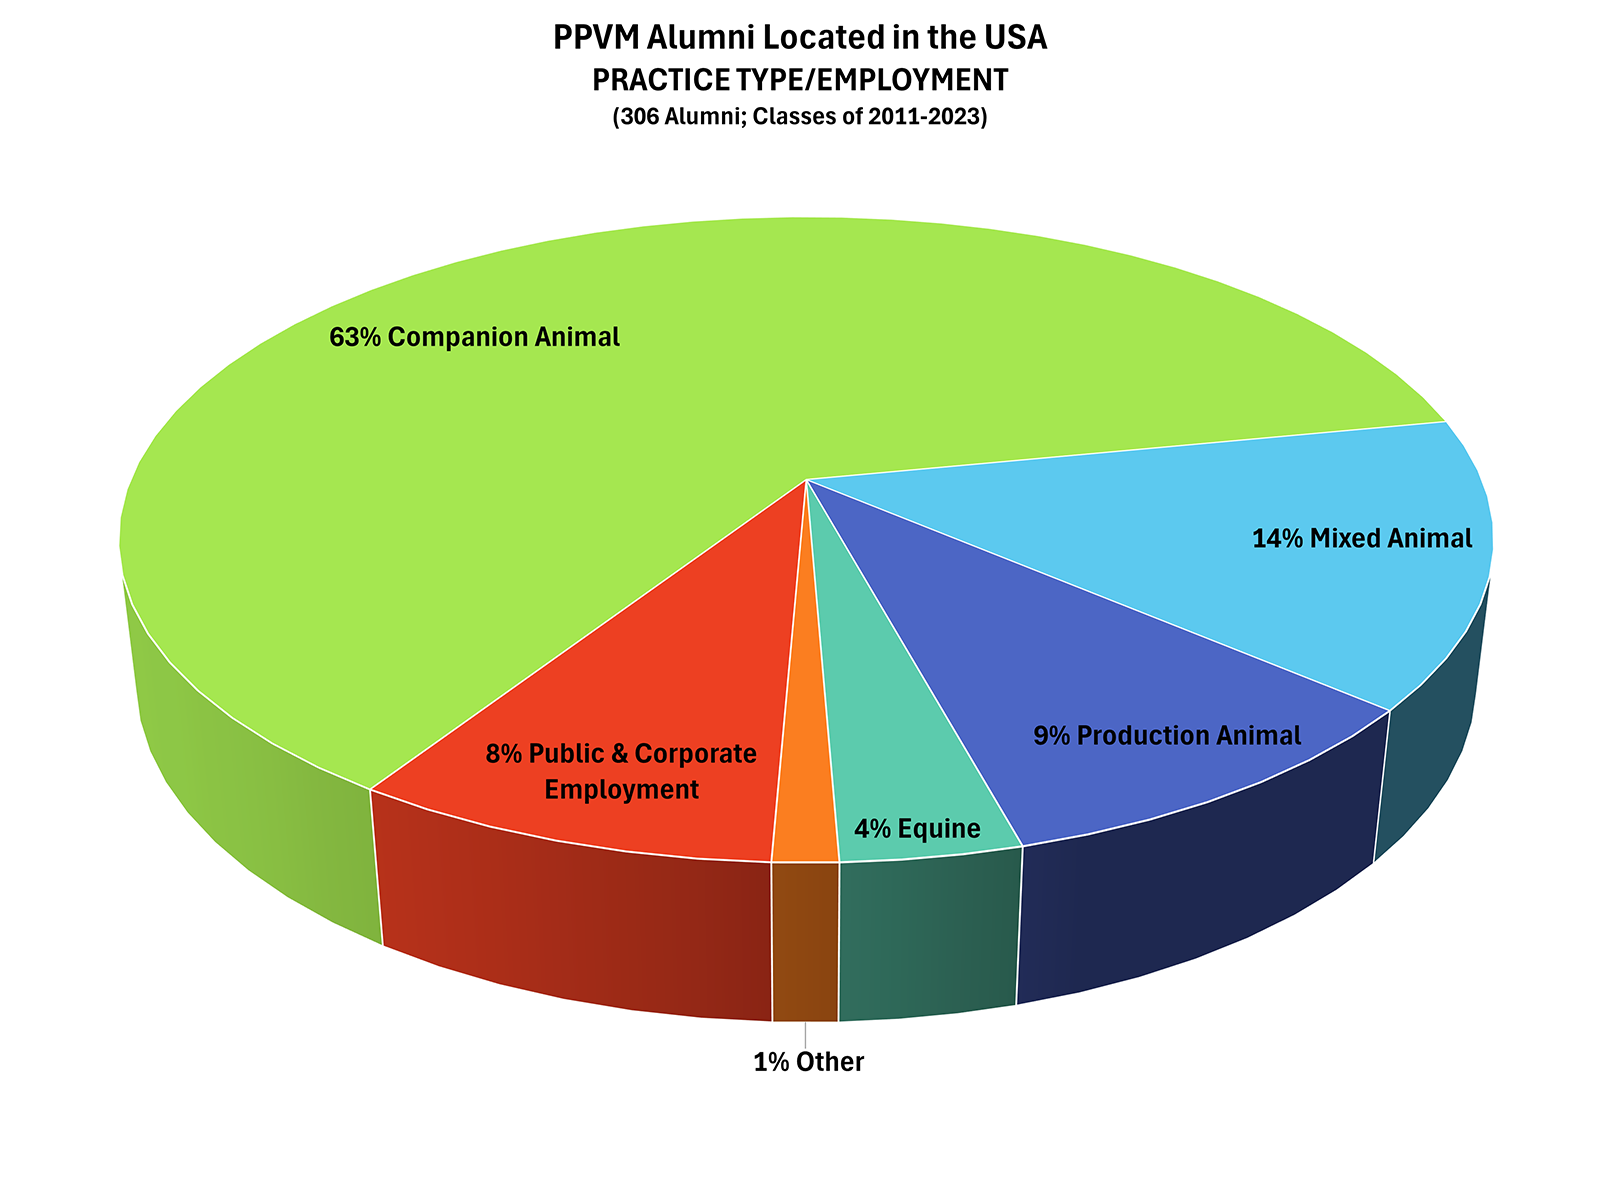 Pie chart showing distribution of practice type for PPVM Alumni in the USA